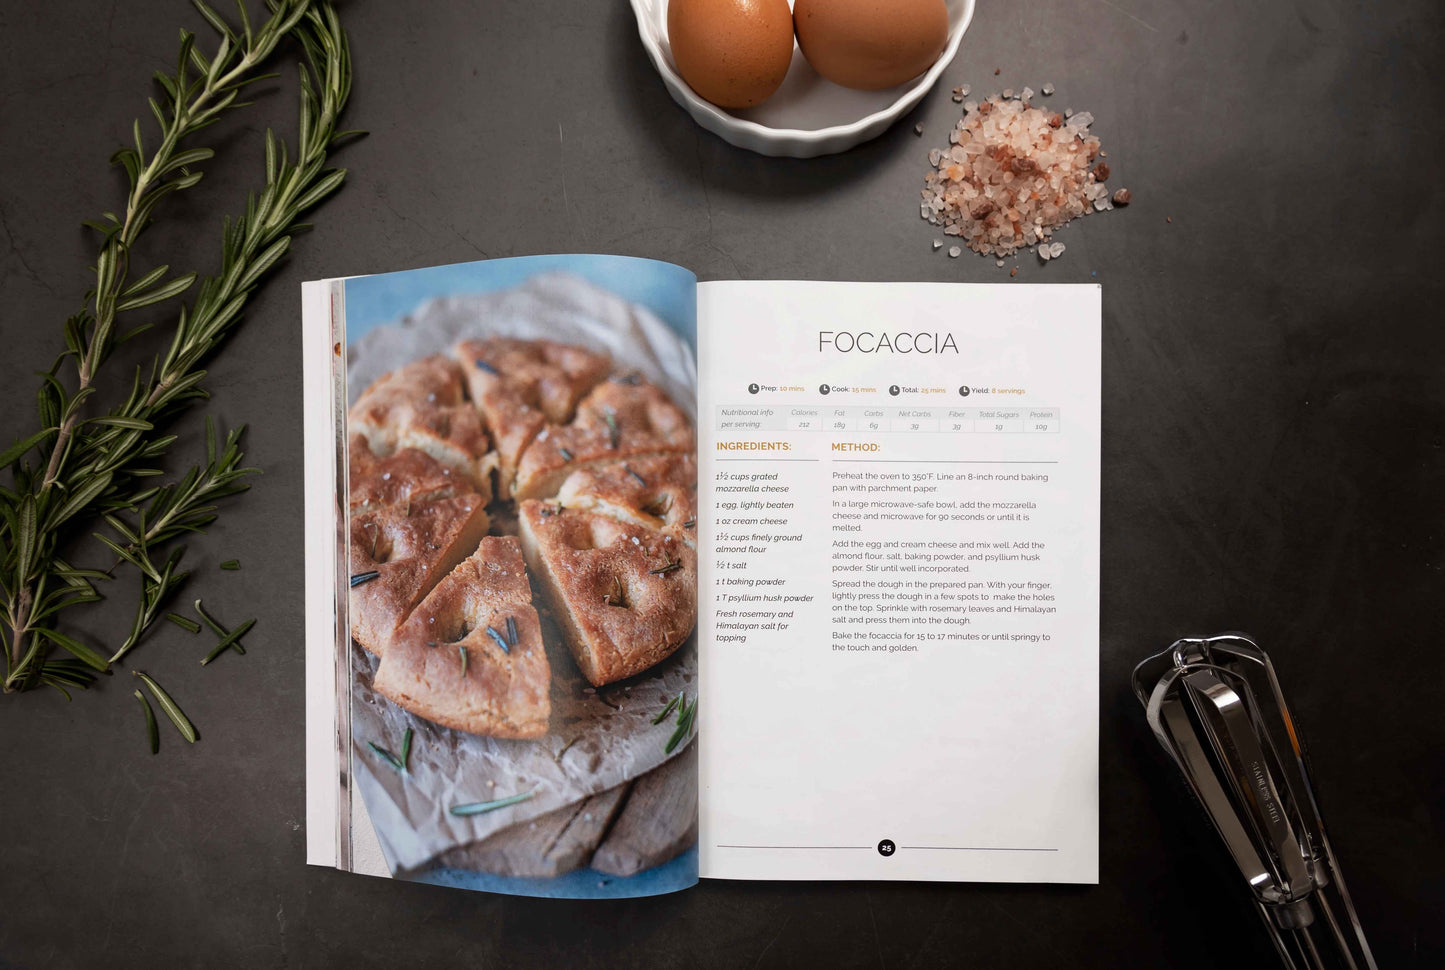 An opened keto carbs cookbook placed on a grey surface. There is rosemary and sea salt nearby. A white bowl of eggs, and a mixer is also visible.